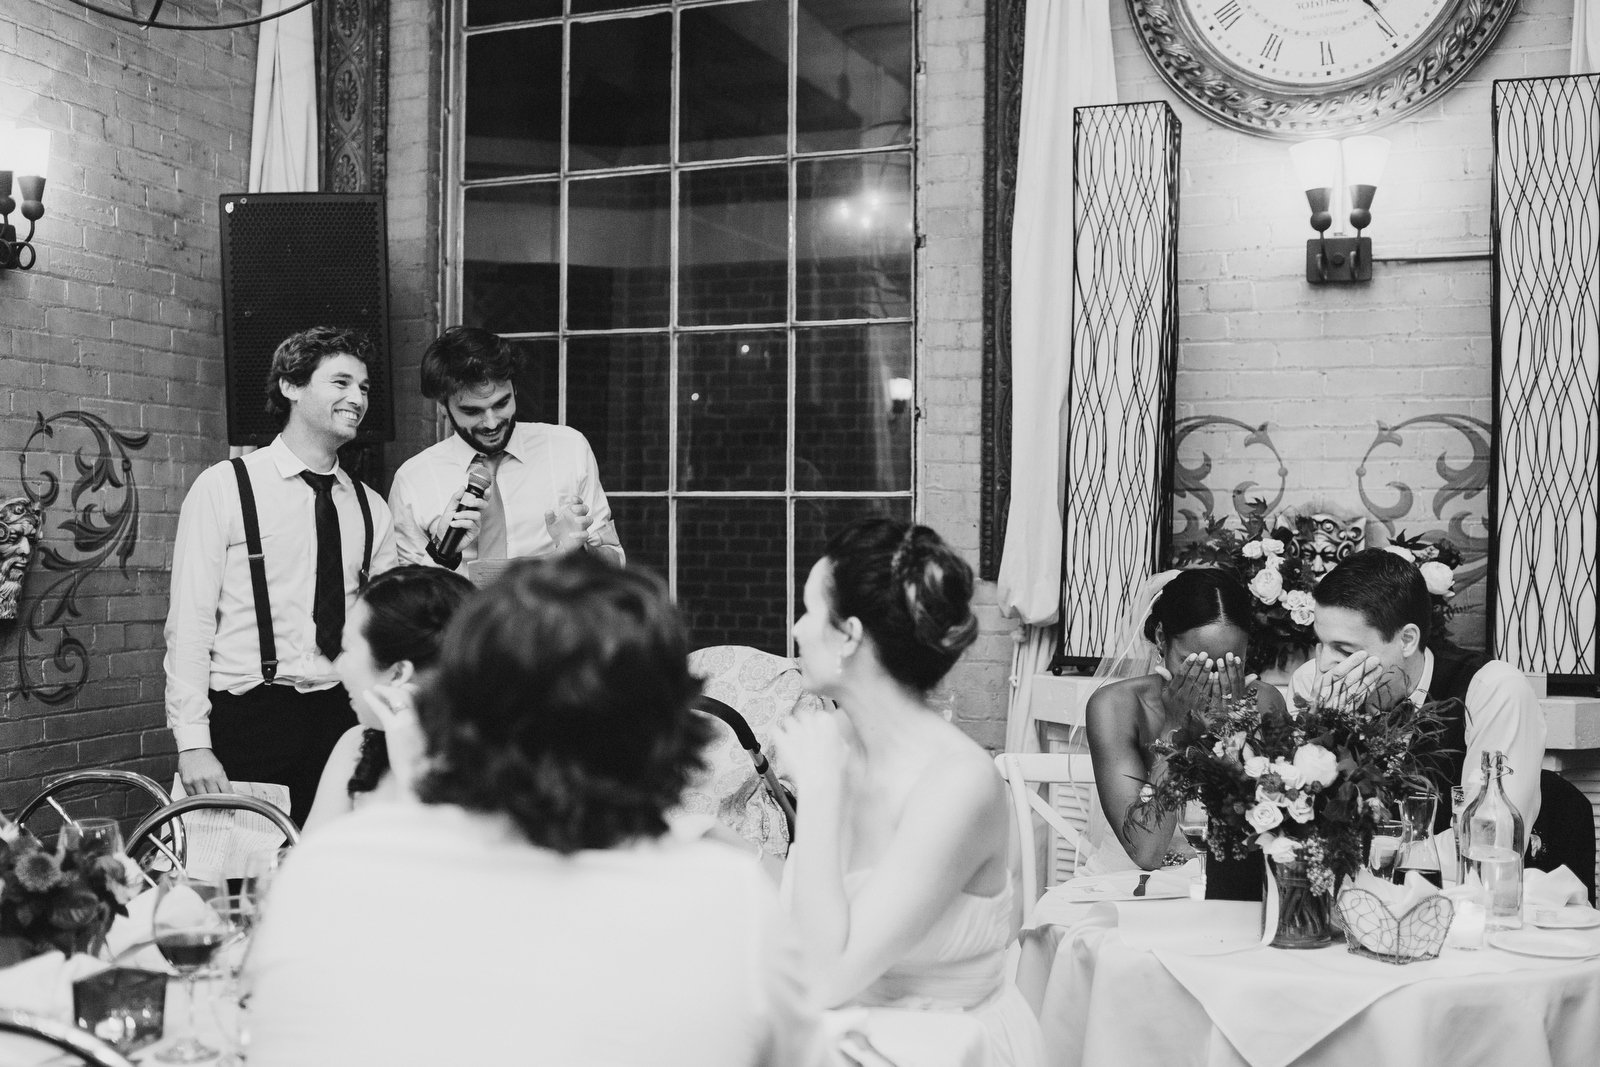 i cannot believe they are telling this story | liberty village wedding photography | caffino ristorante wedding